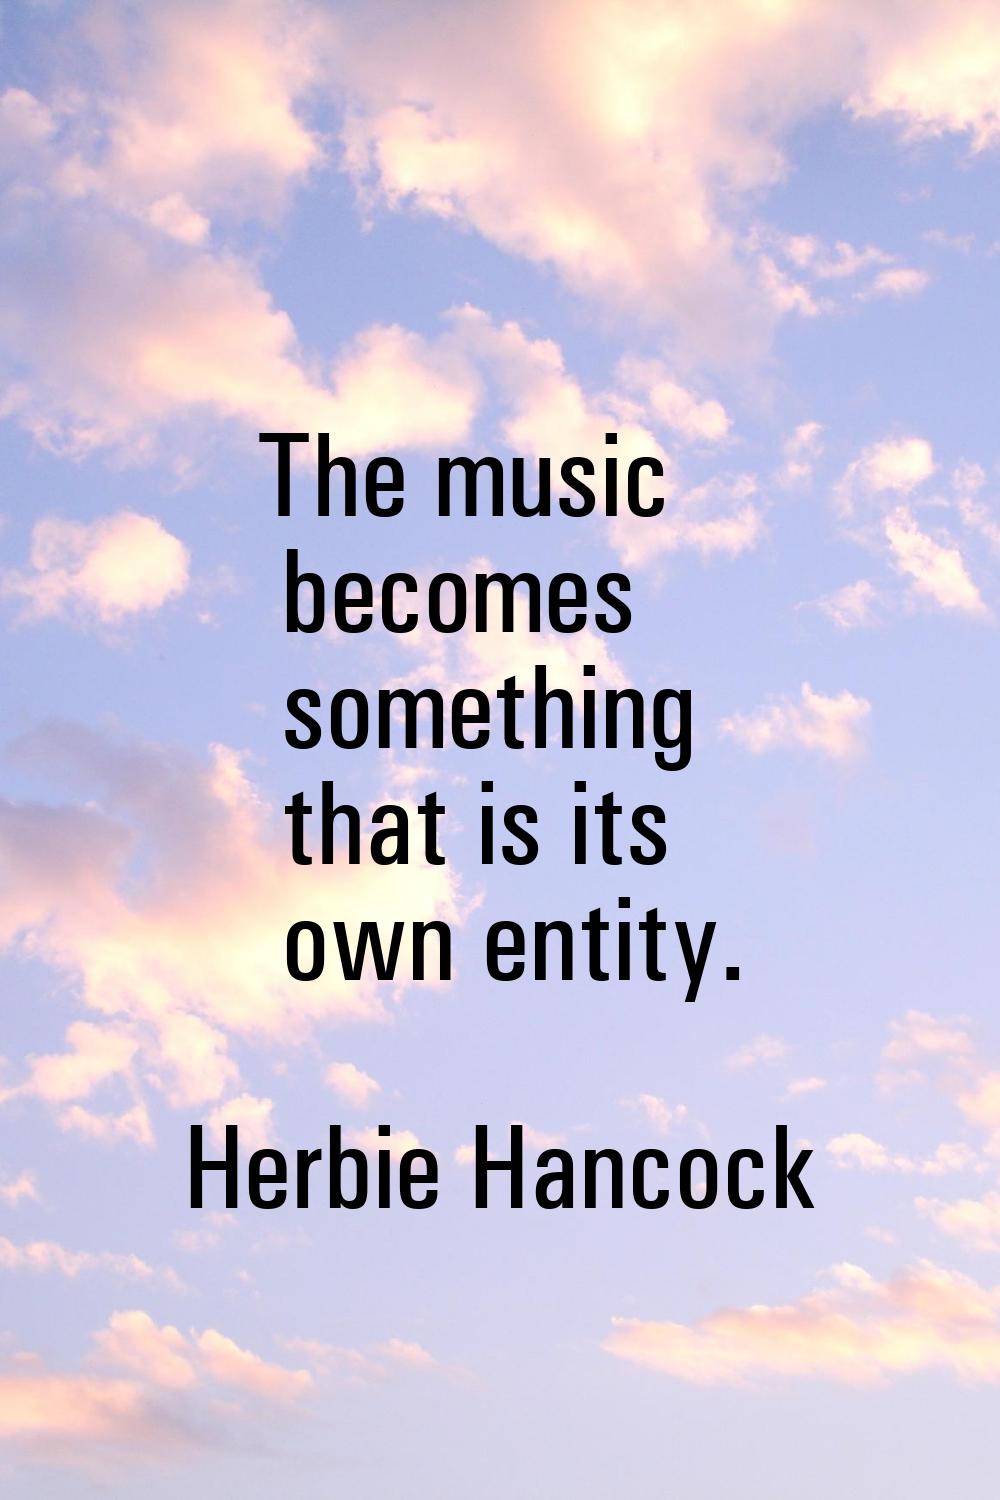 The music becomes something that is its own entity.